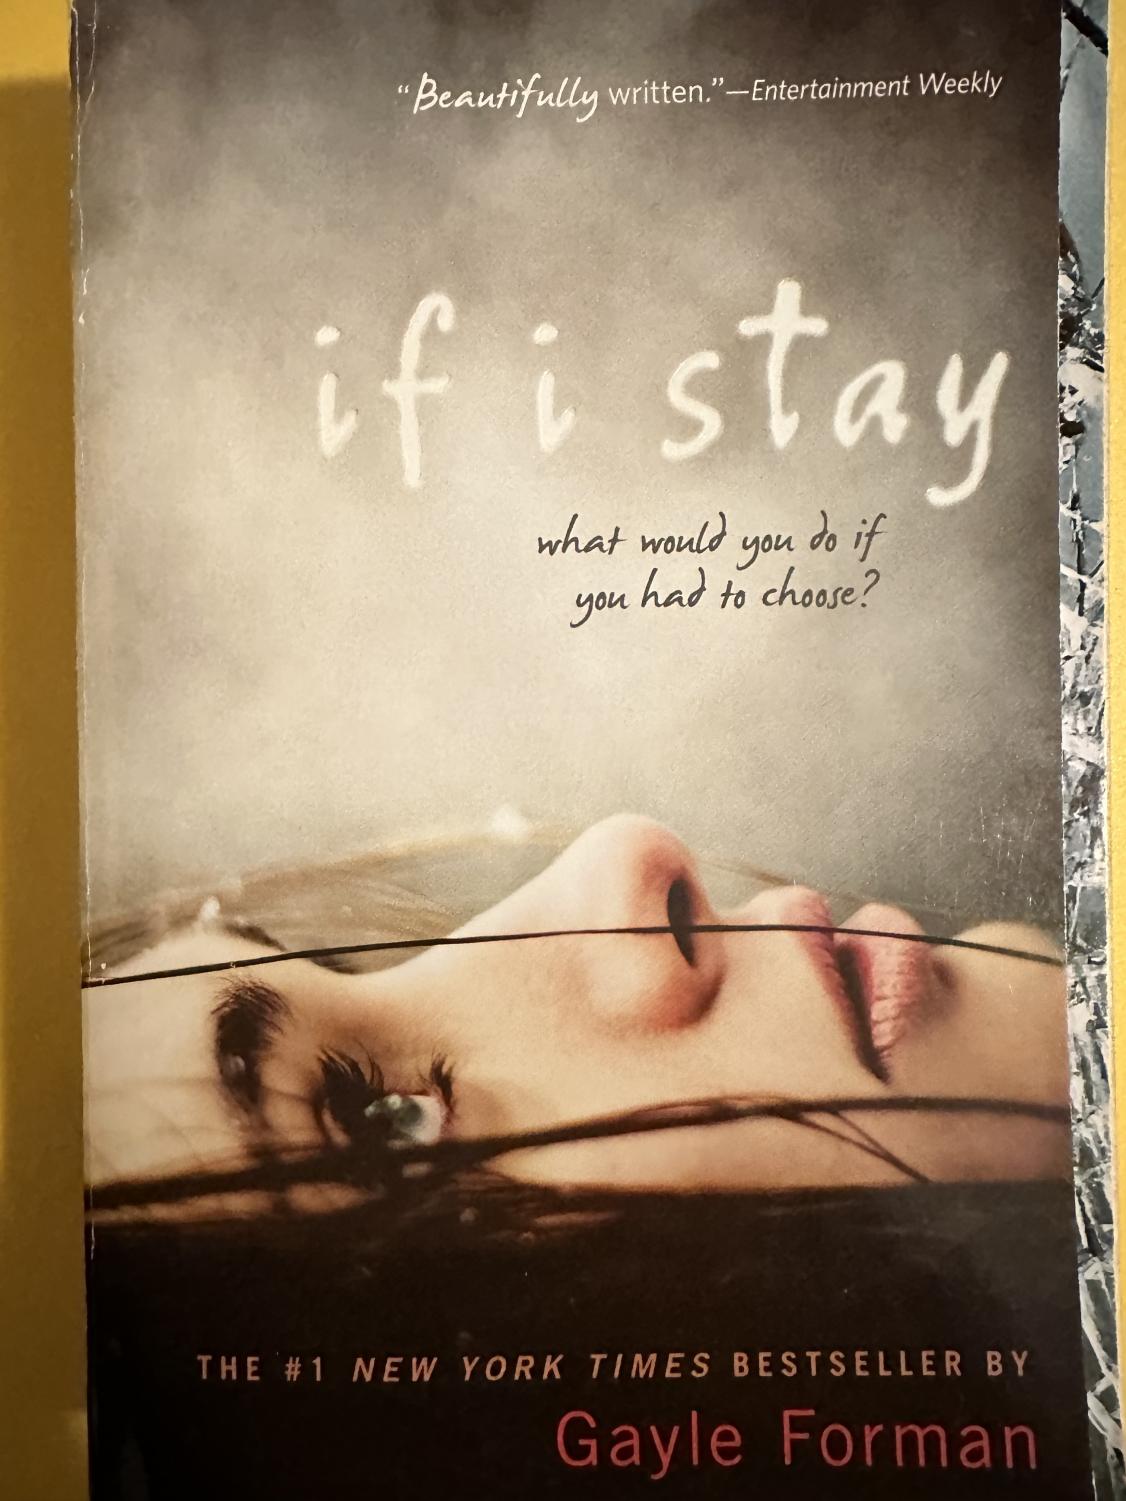 if i stay gayle forman